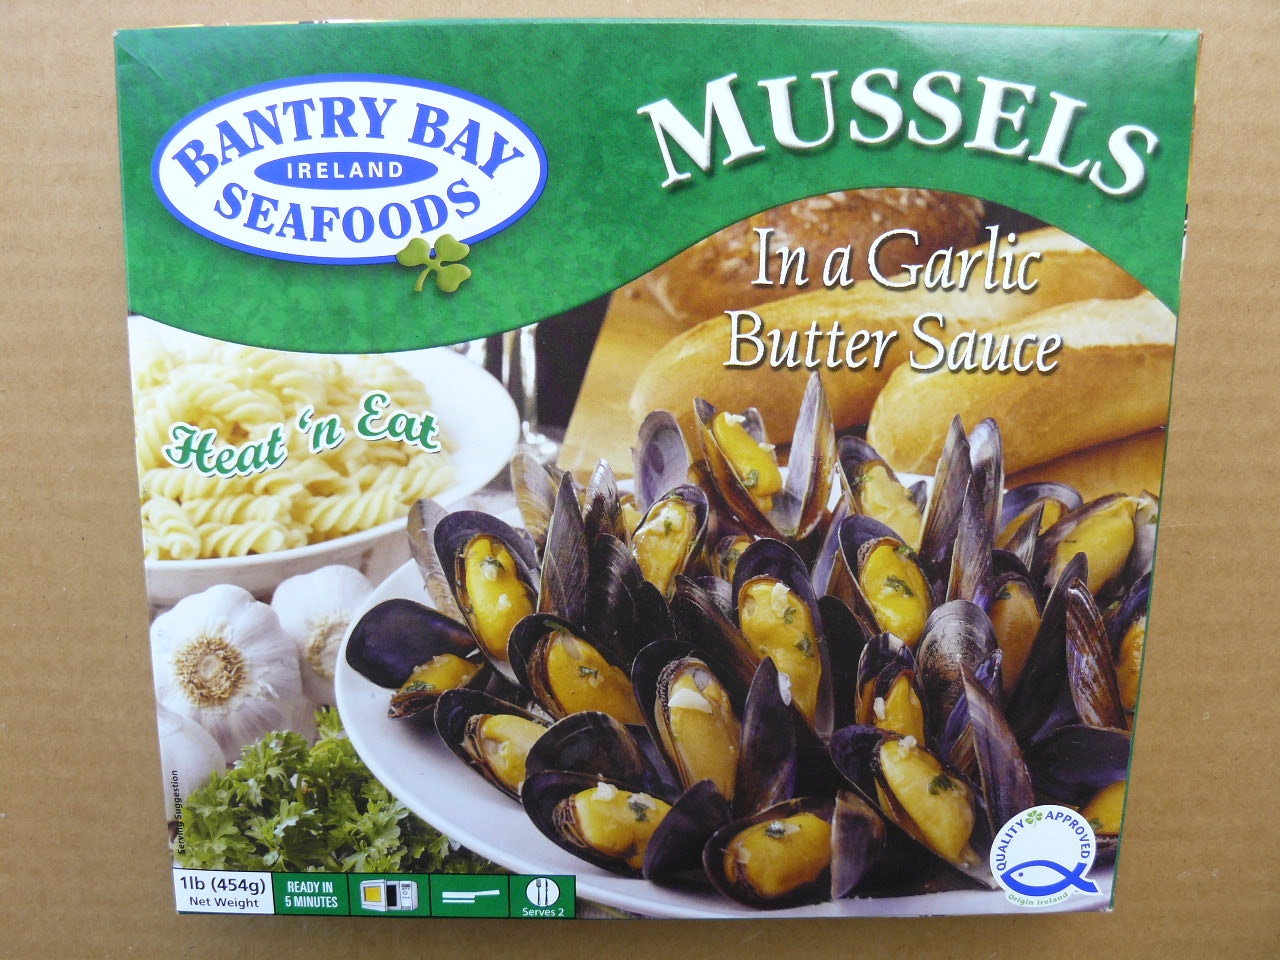 Box front of Bantry Bay Seafood Mussels